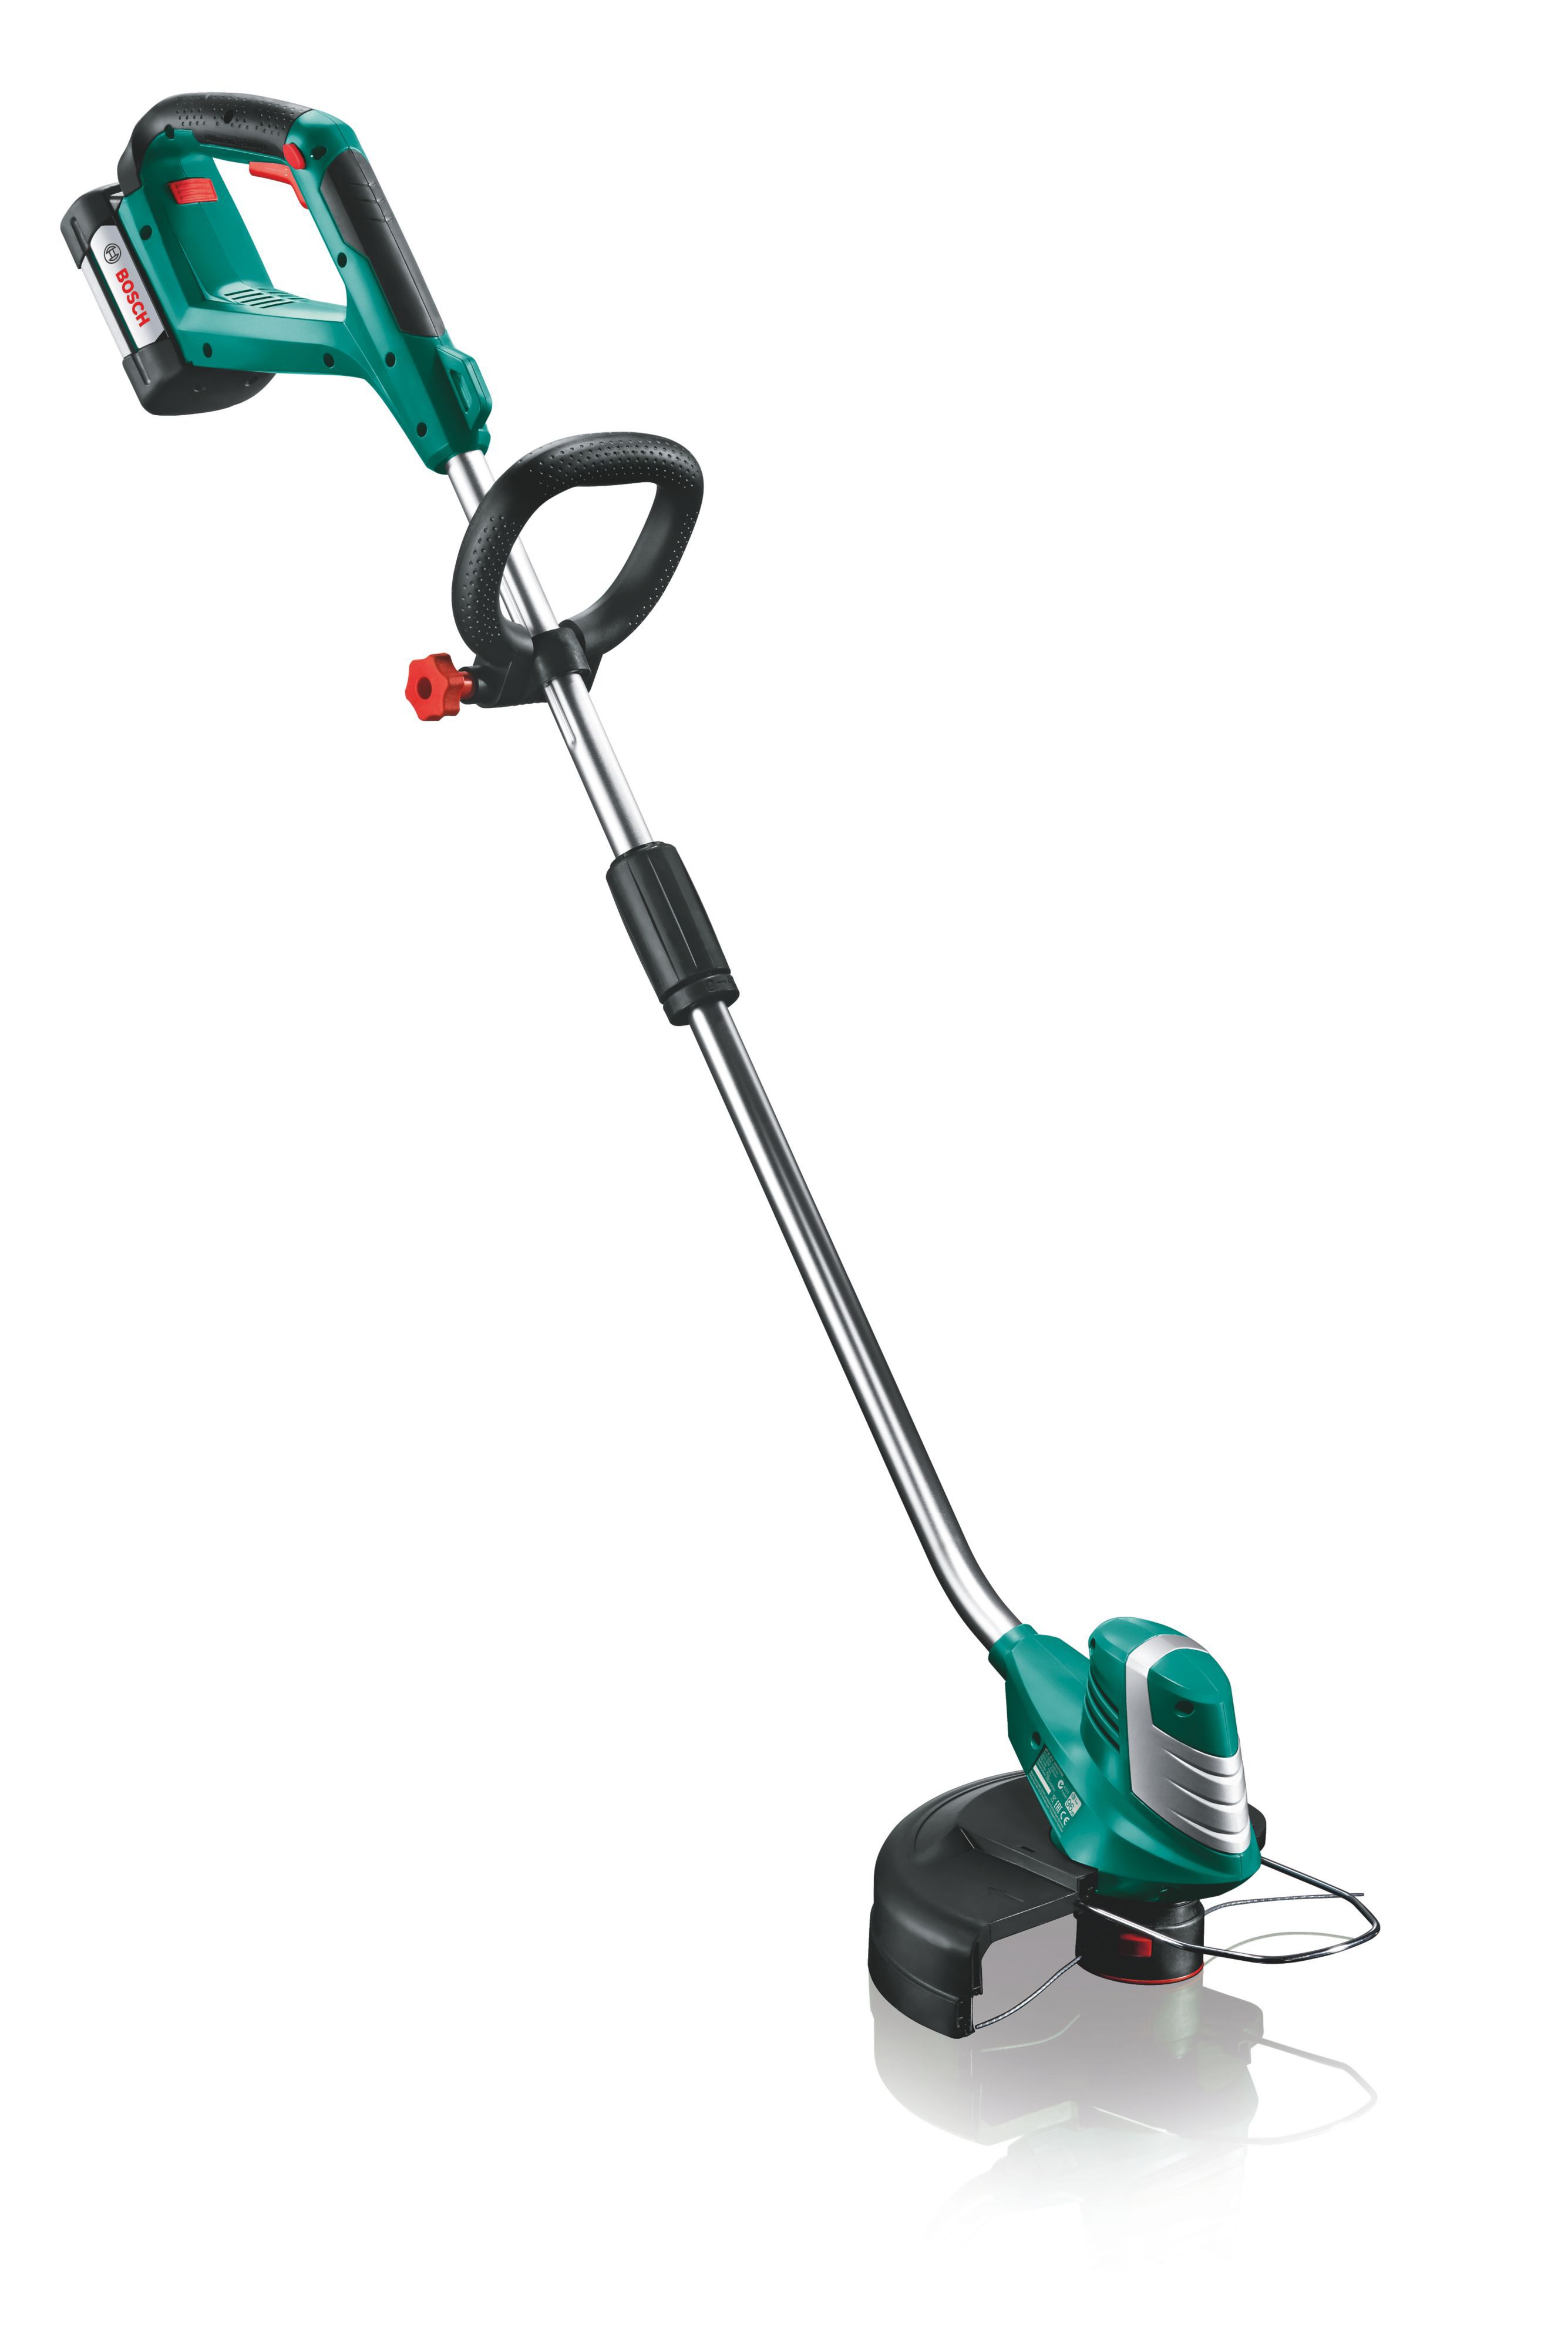 Black Decker Sva520b Qw 2 In 1 Broom Vacuum Cleaner 18 V Power And 2 Ah Battery 36 Watt Hour Stays Standing Extendable Nozzle And Brush Colour Grey And Black Lithium Battery